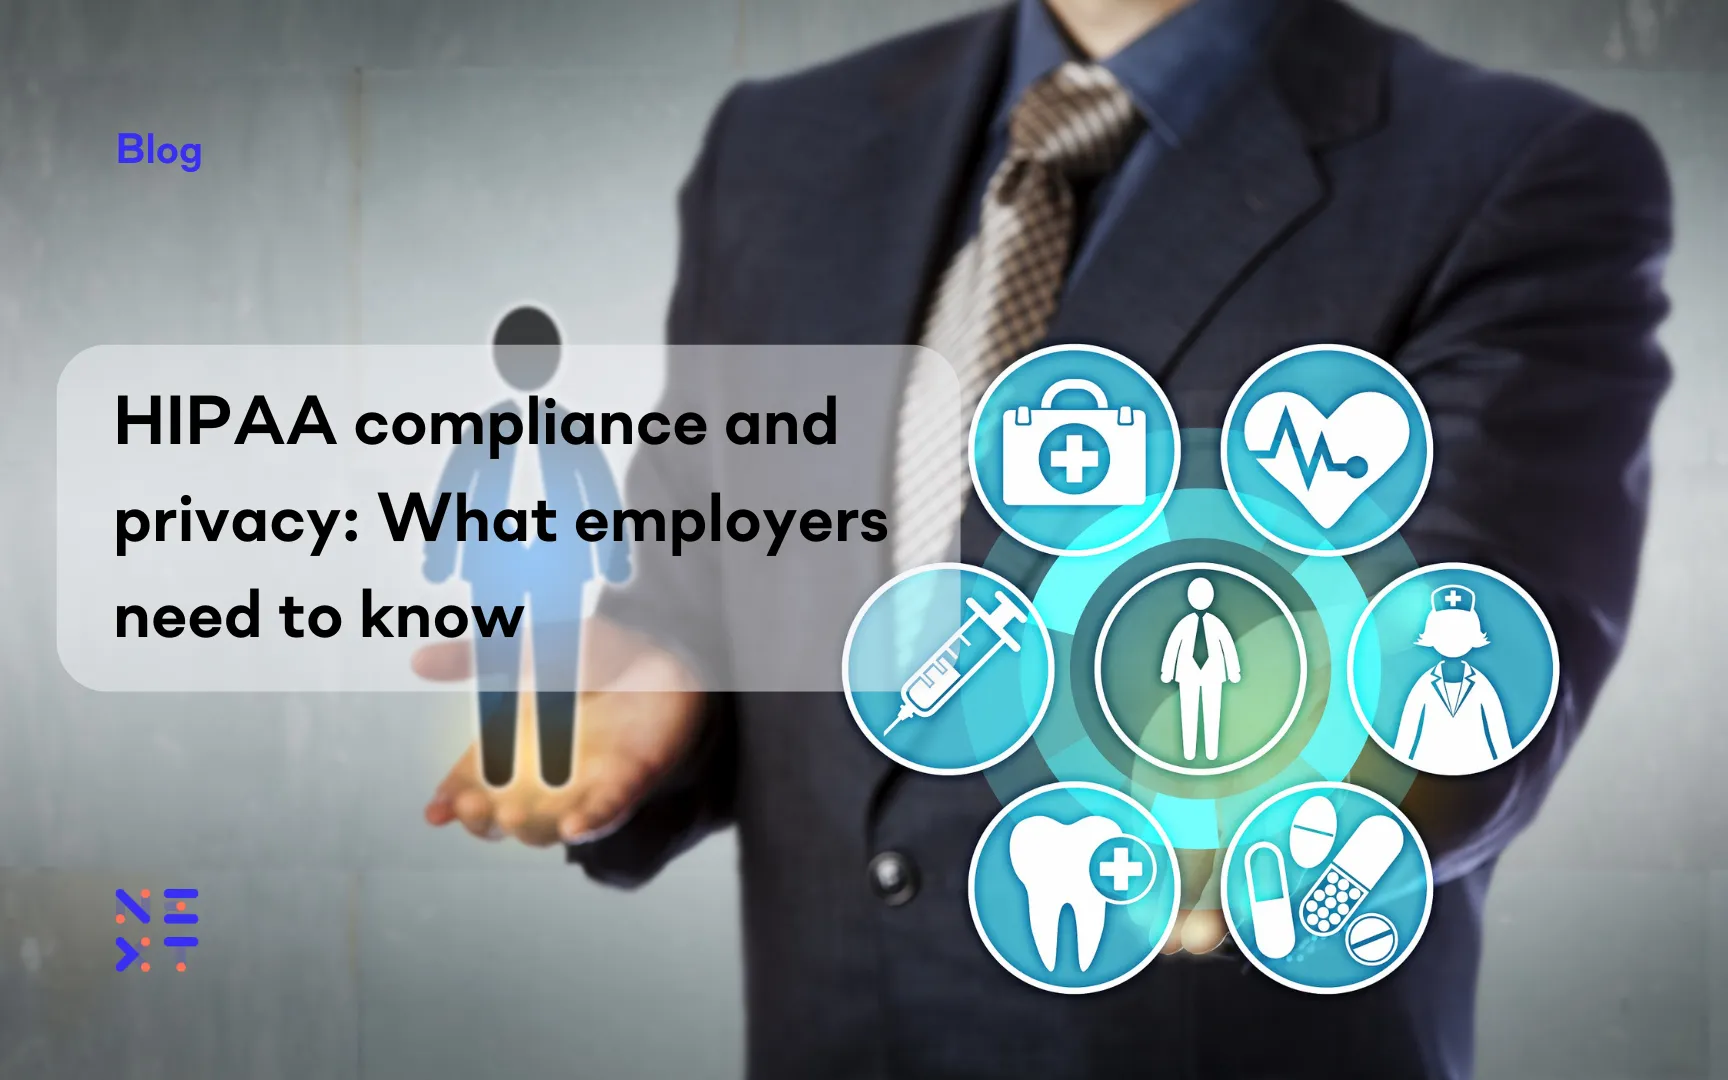 HIPAA compliance and privacy: What employers need to know